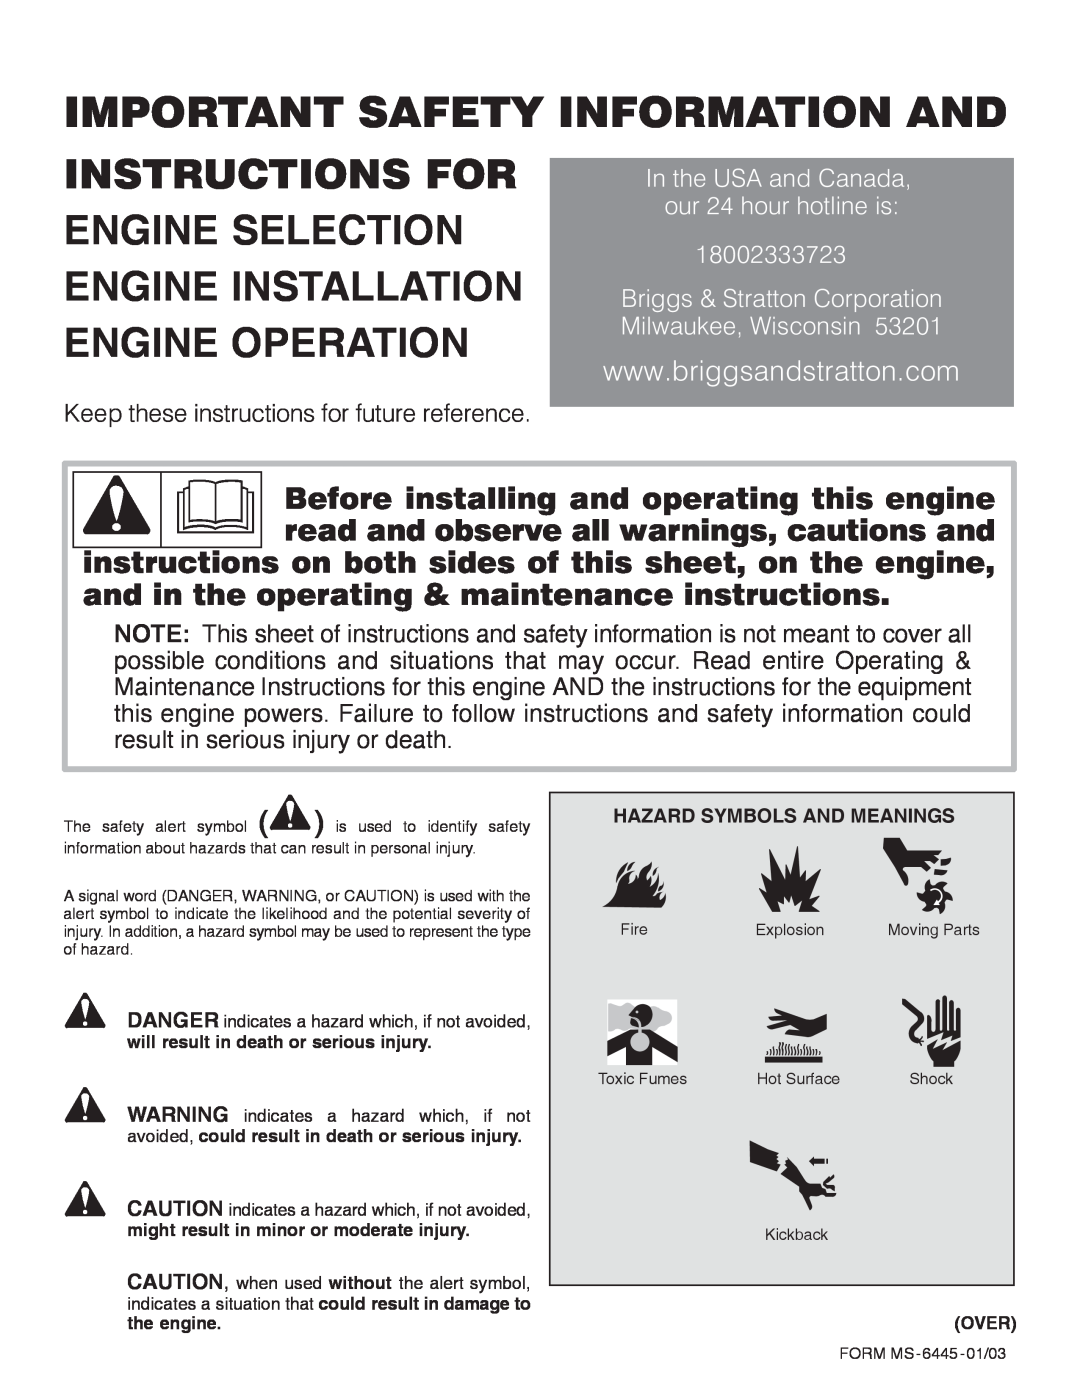 Briggs & Stratton 8-P Important Safety Information And, Instructions For, and in the operating & maintenance instructions 